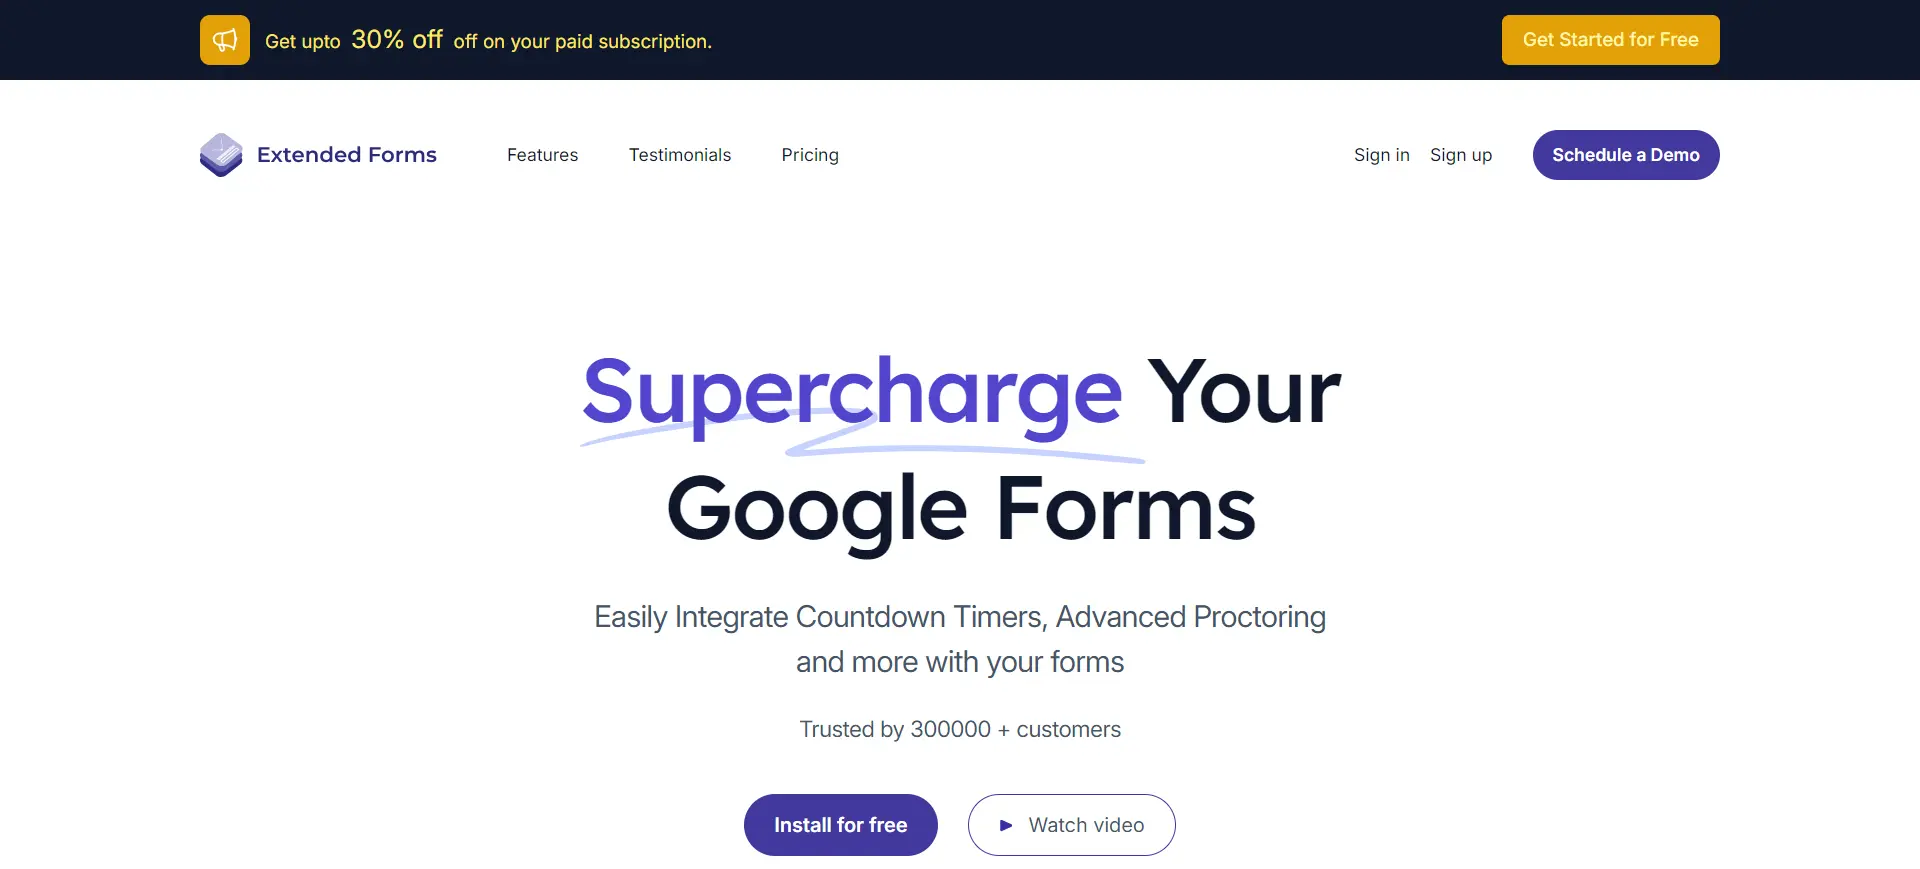 Checkbox Grid in Google Forms - ExtendedForms